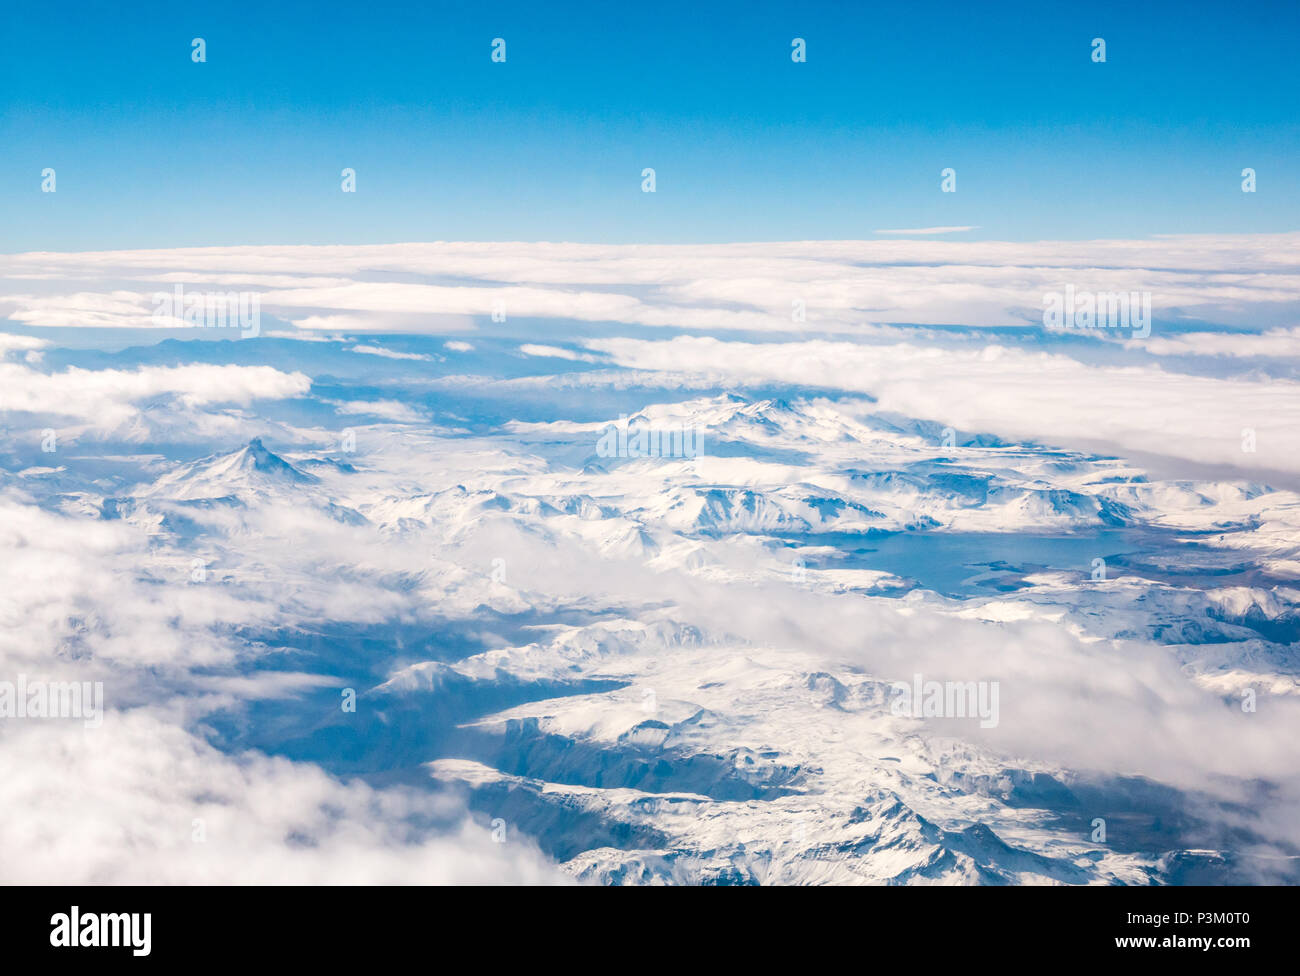 View from aeroplane window of snow covered Andes mountains with cloud cover and lake, Southern Patagonian Ice field, Patagonia, Chile, South America Stock Photo